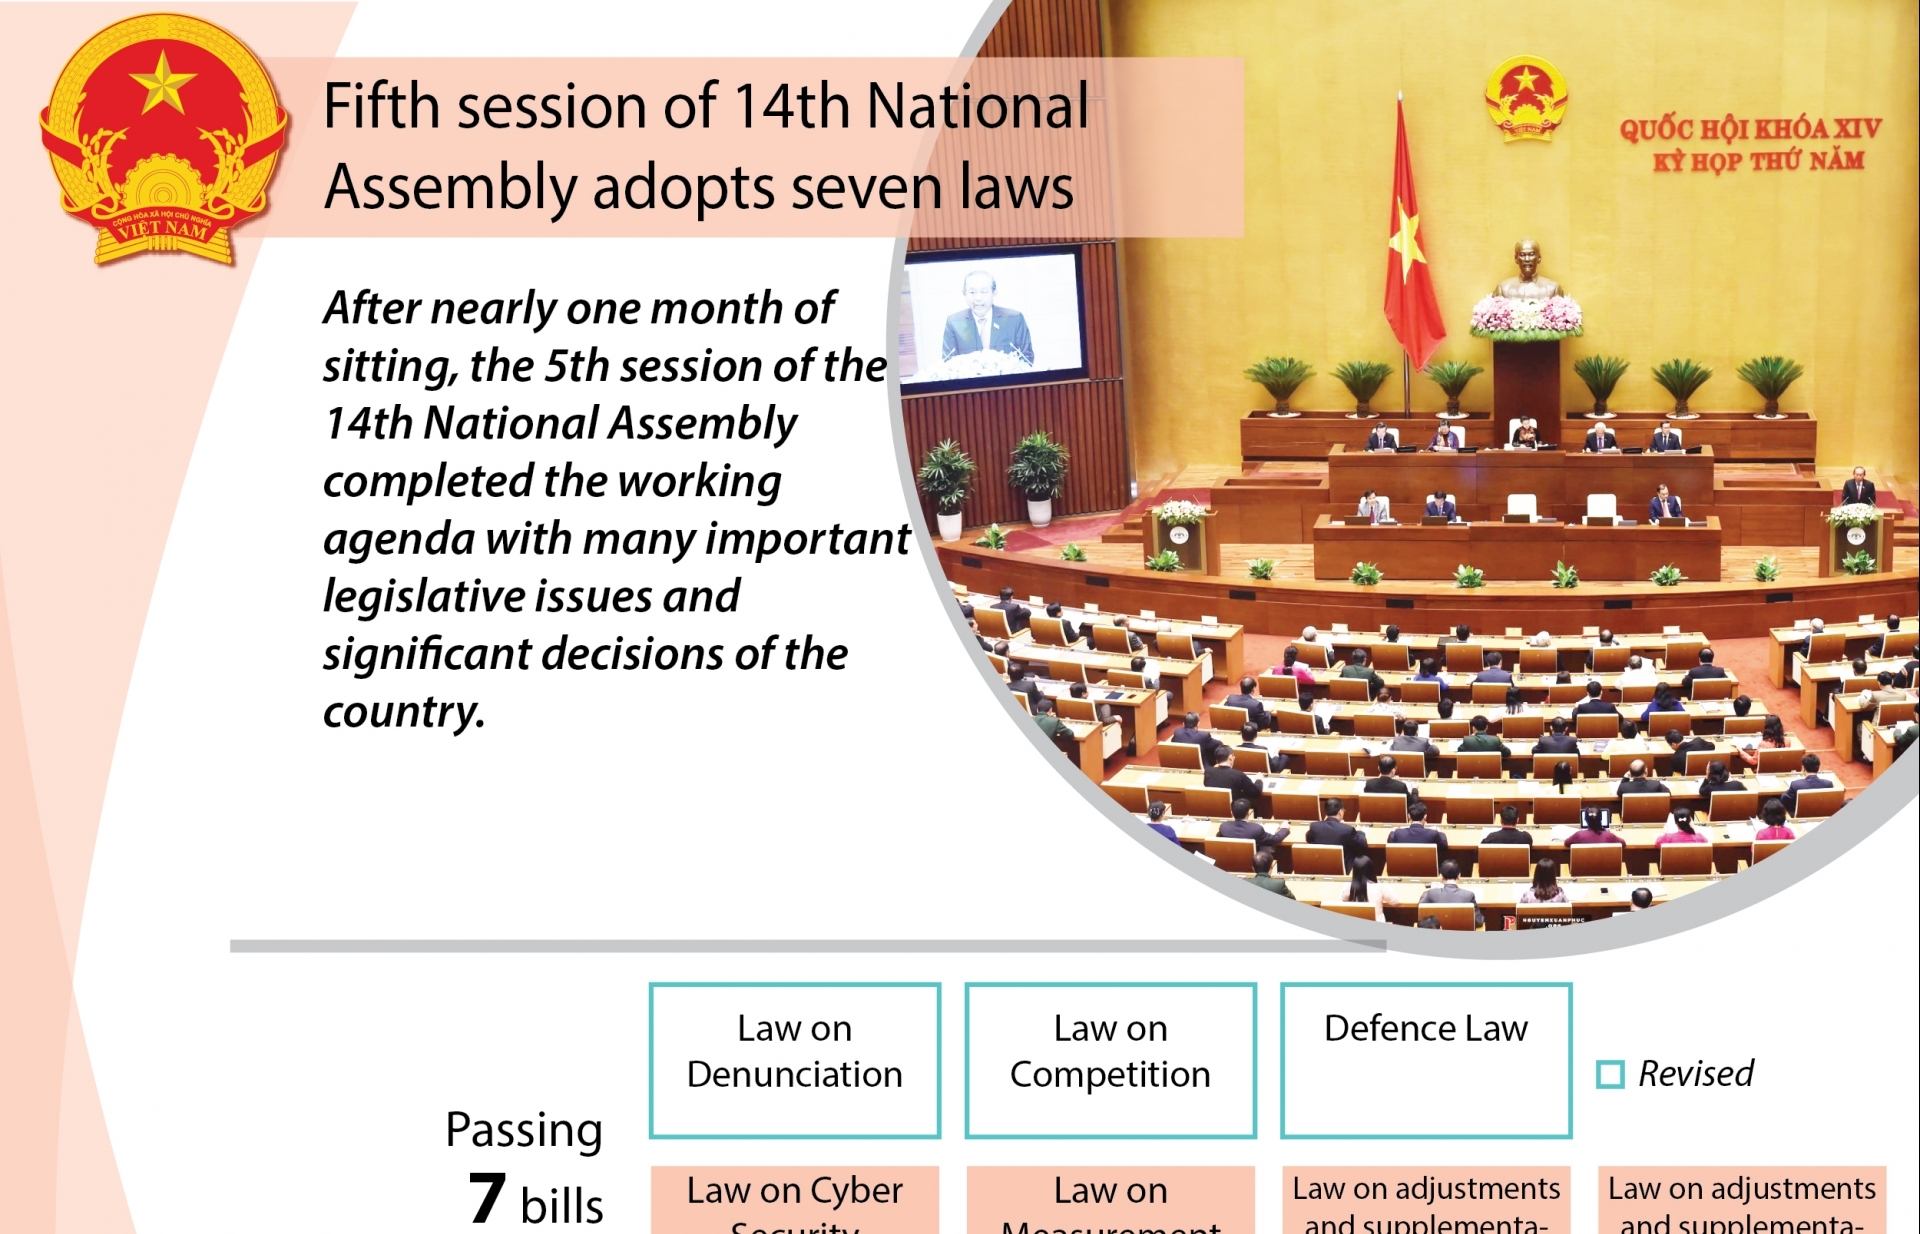 National Assembly adopts seven laws during fifth session